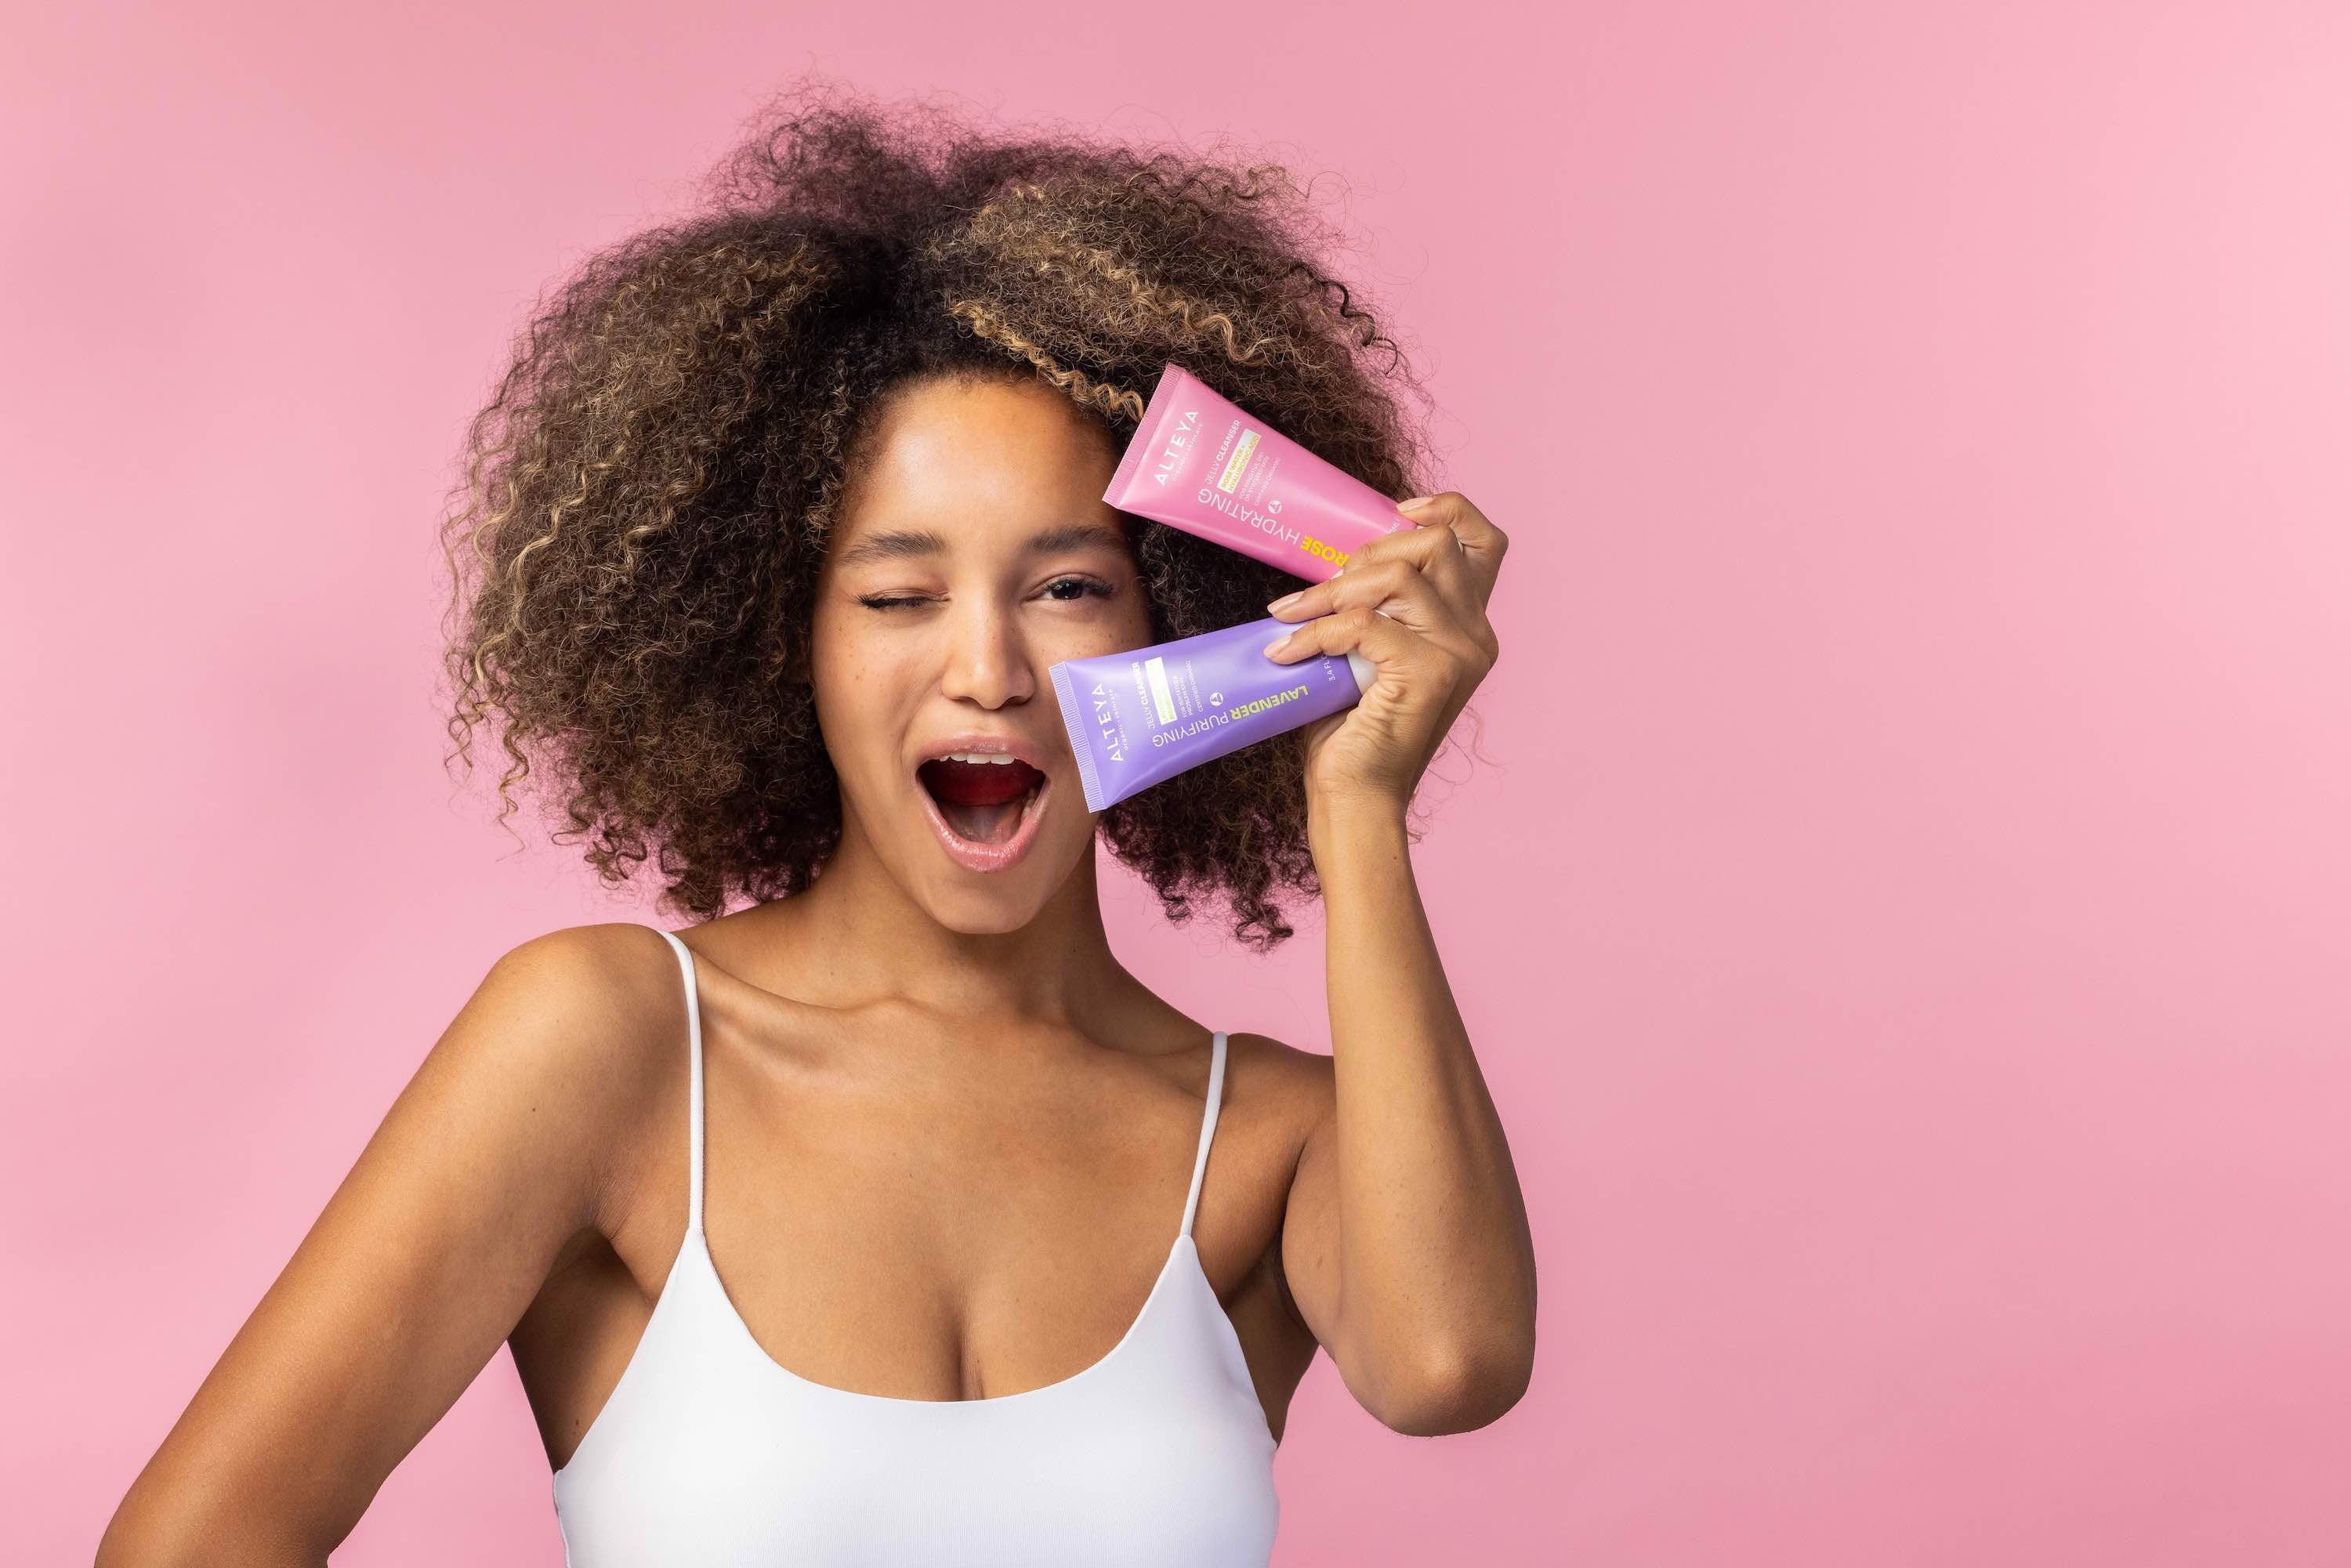 A young woman with afro hair is holding two tubes of skin care products.